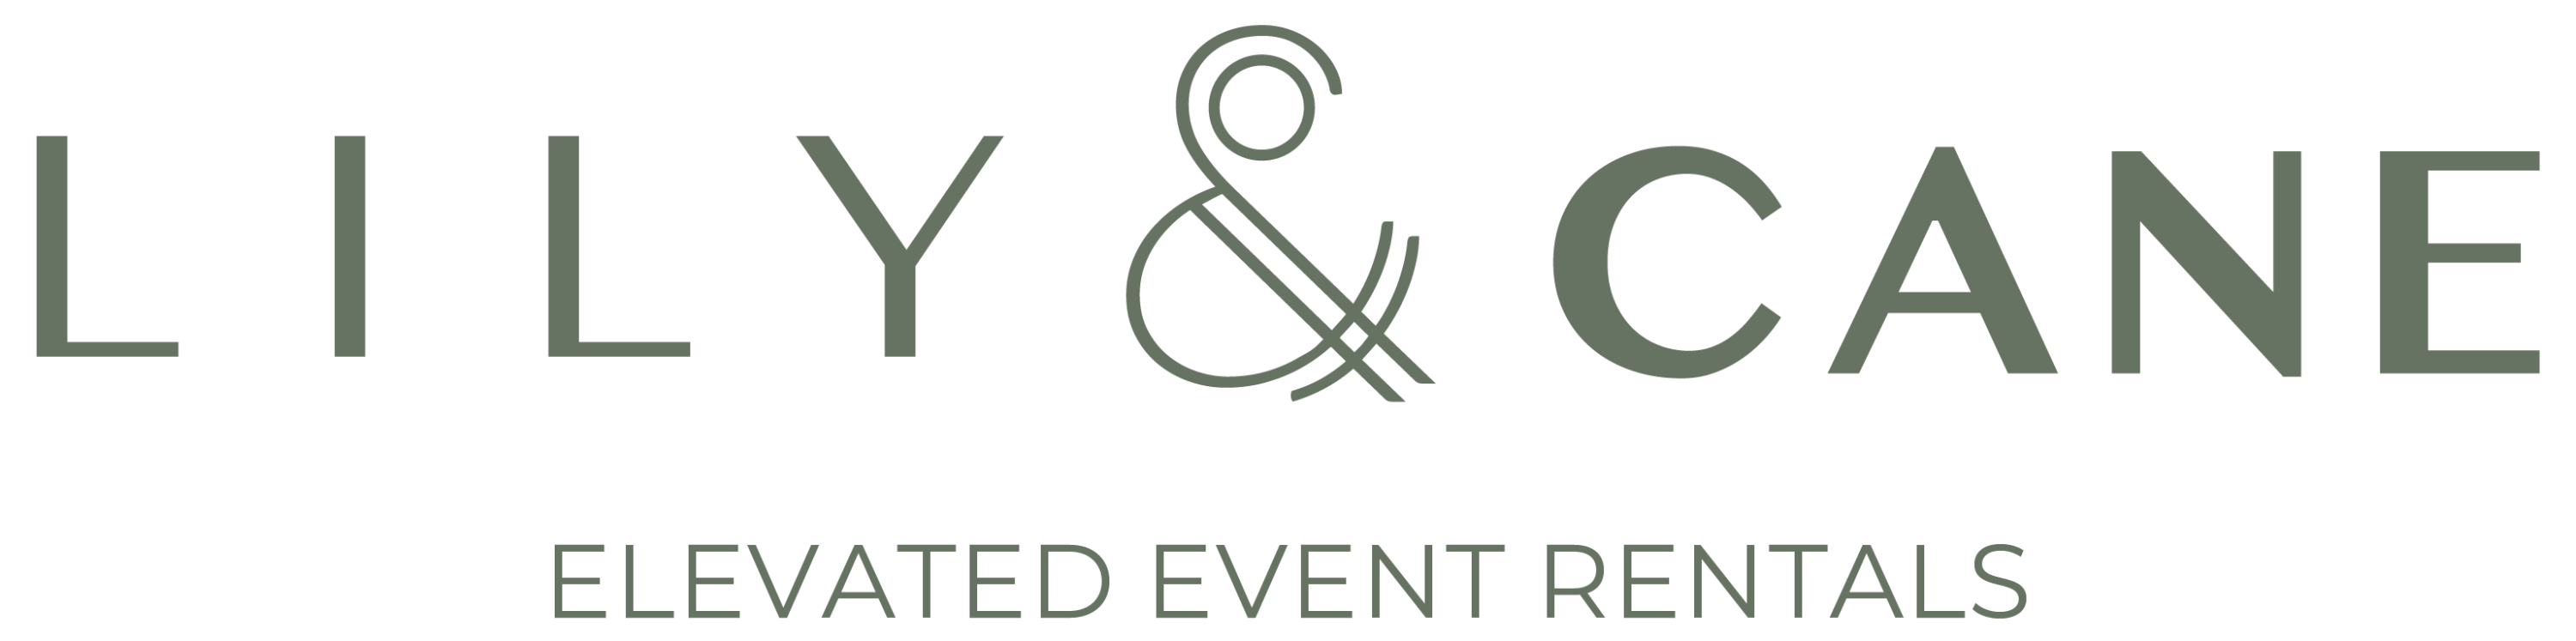 Lily & Cane - elevated event rentals